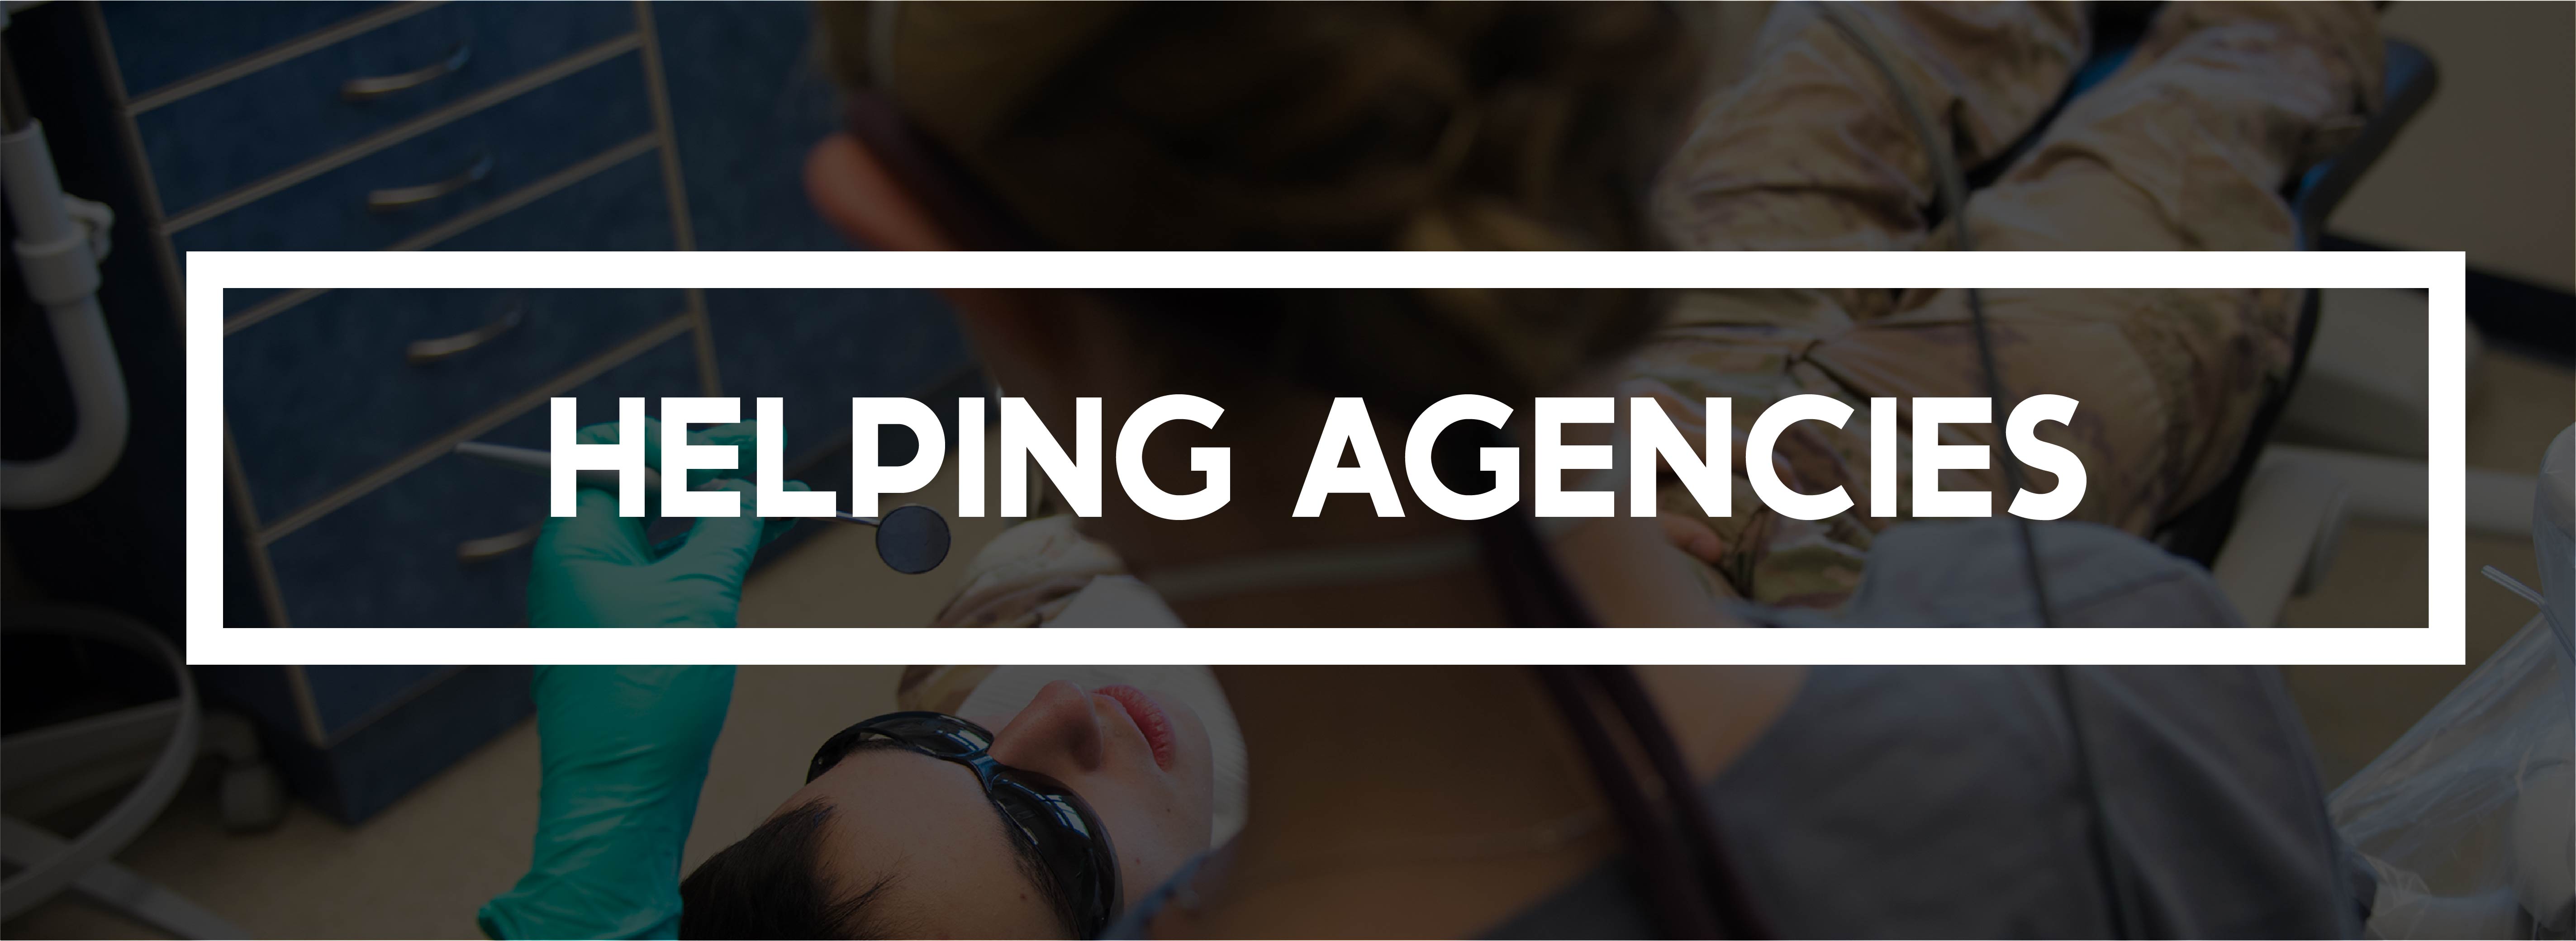 A logo for Helping Agencies